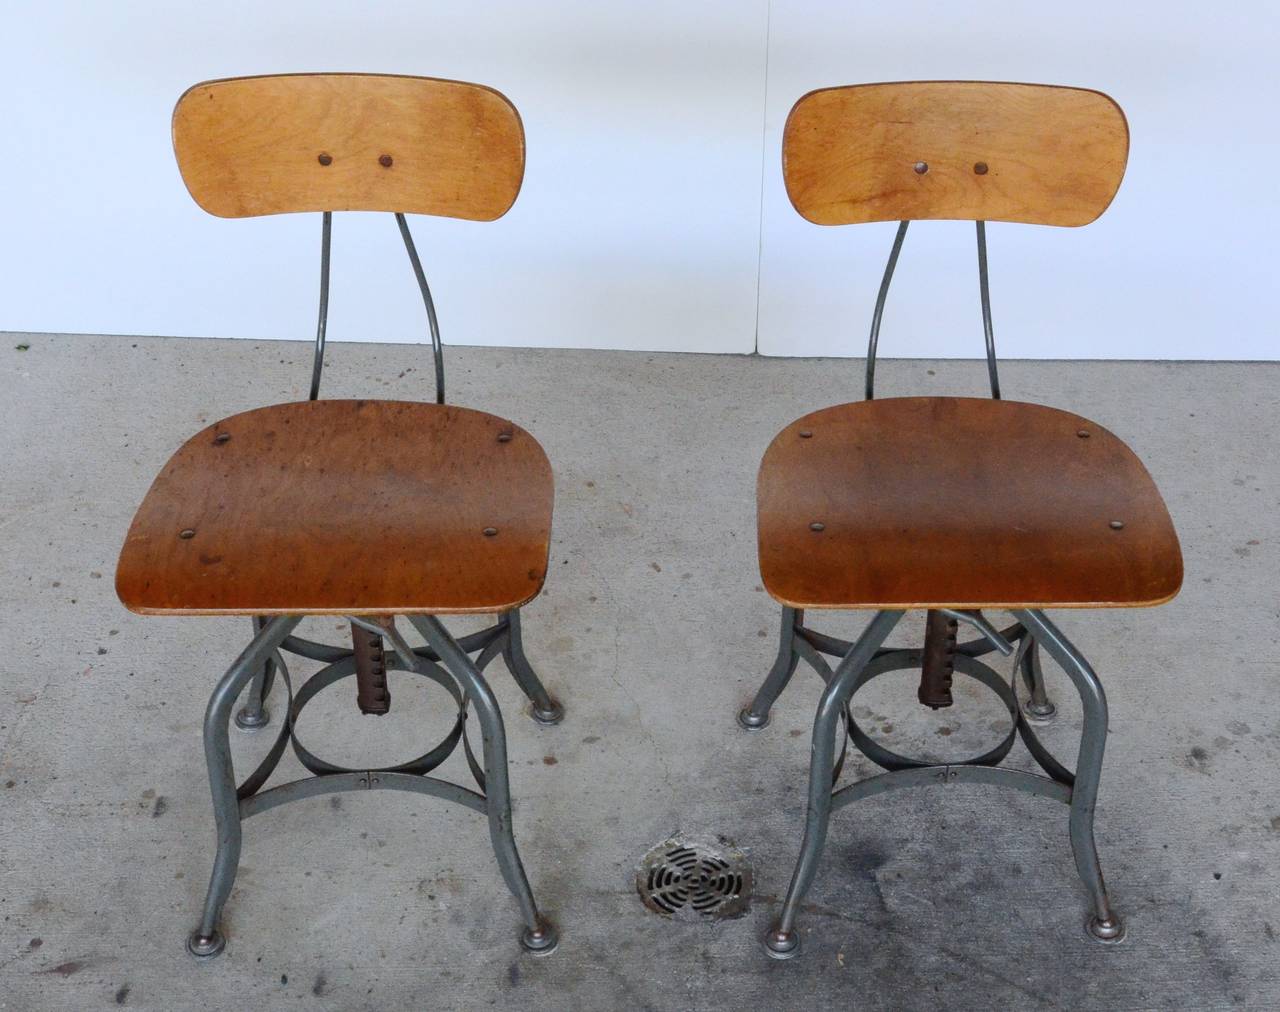 Retaining tags from the Toledo Metal Furniture Company, these iconic chairs have Steampunk flair and authentic Industrial history. Bentwood seats and backs sit on adjustable steel frames. One chair has wheels. Great dining or office chairs.